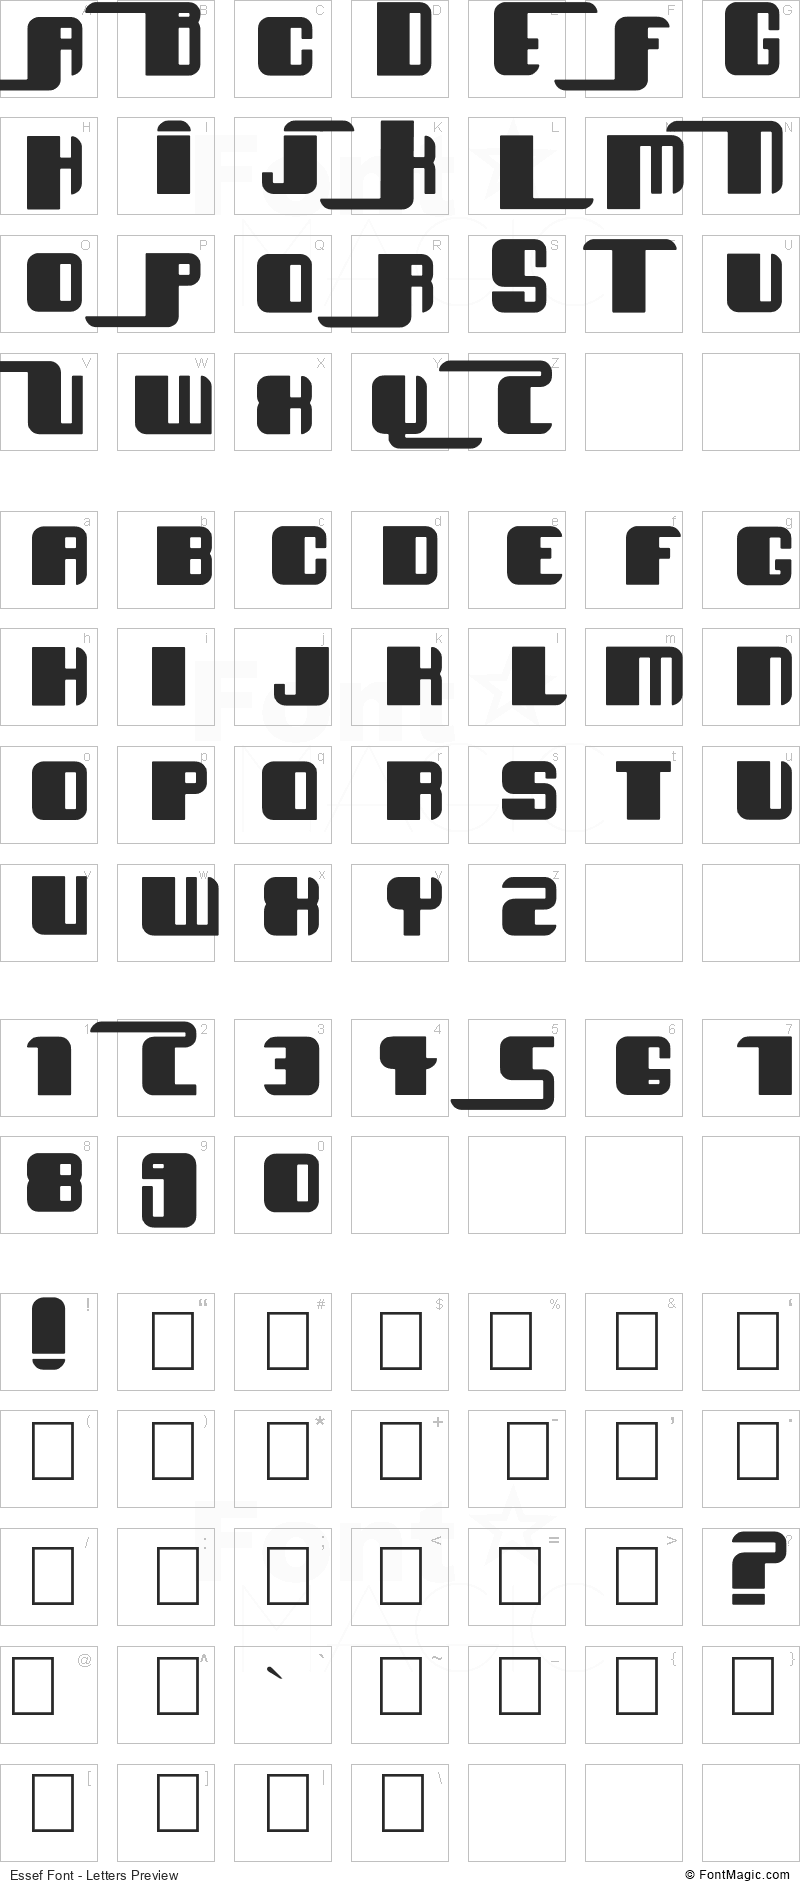 Essef Font - All Latters Preview Chart